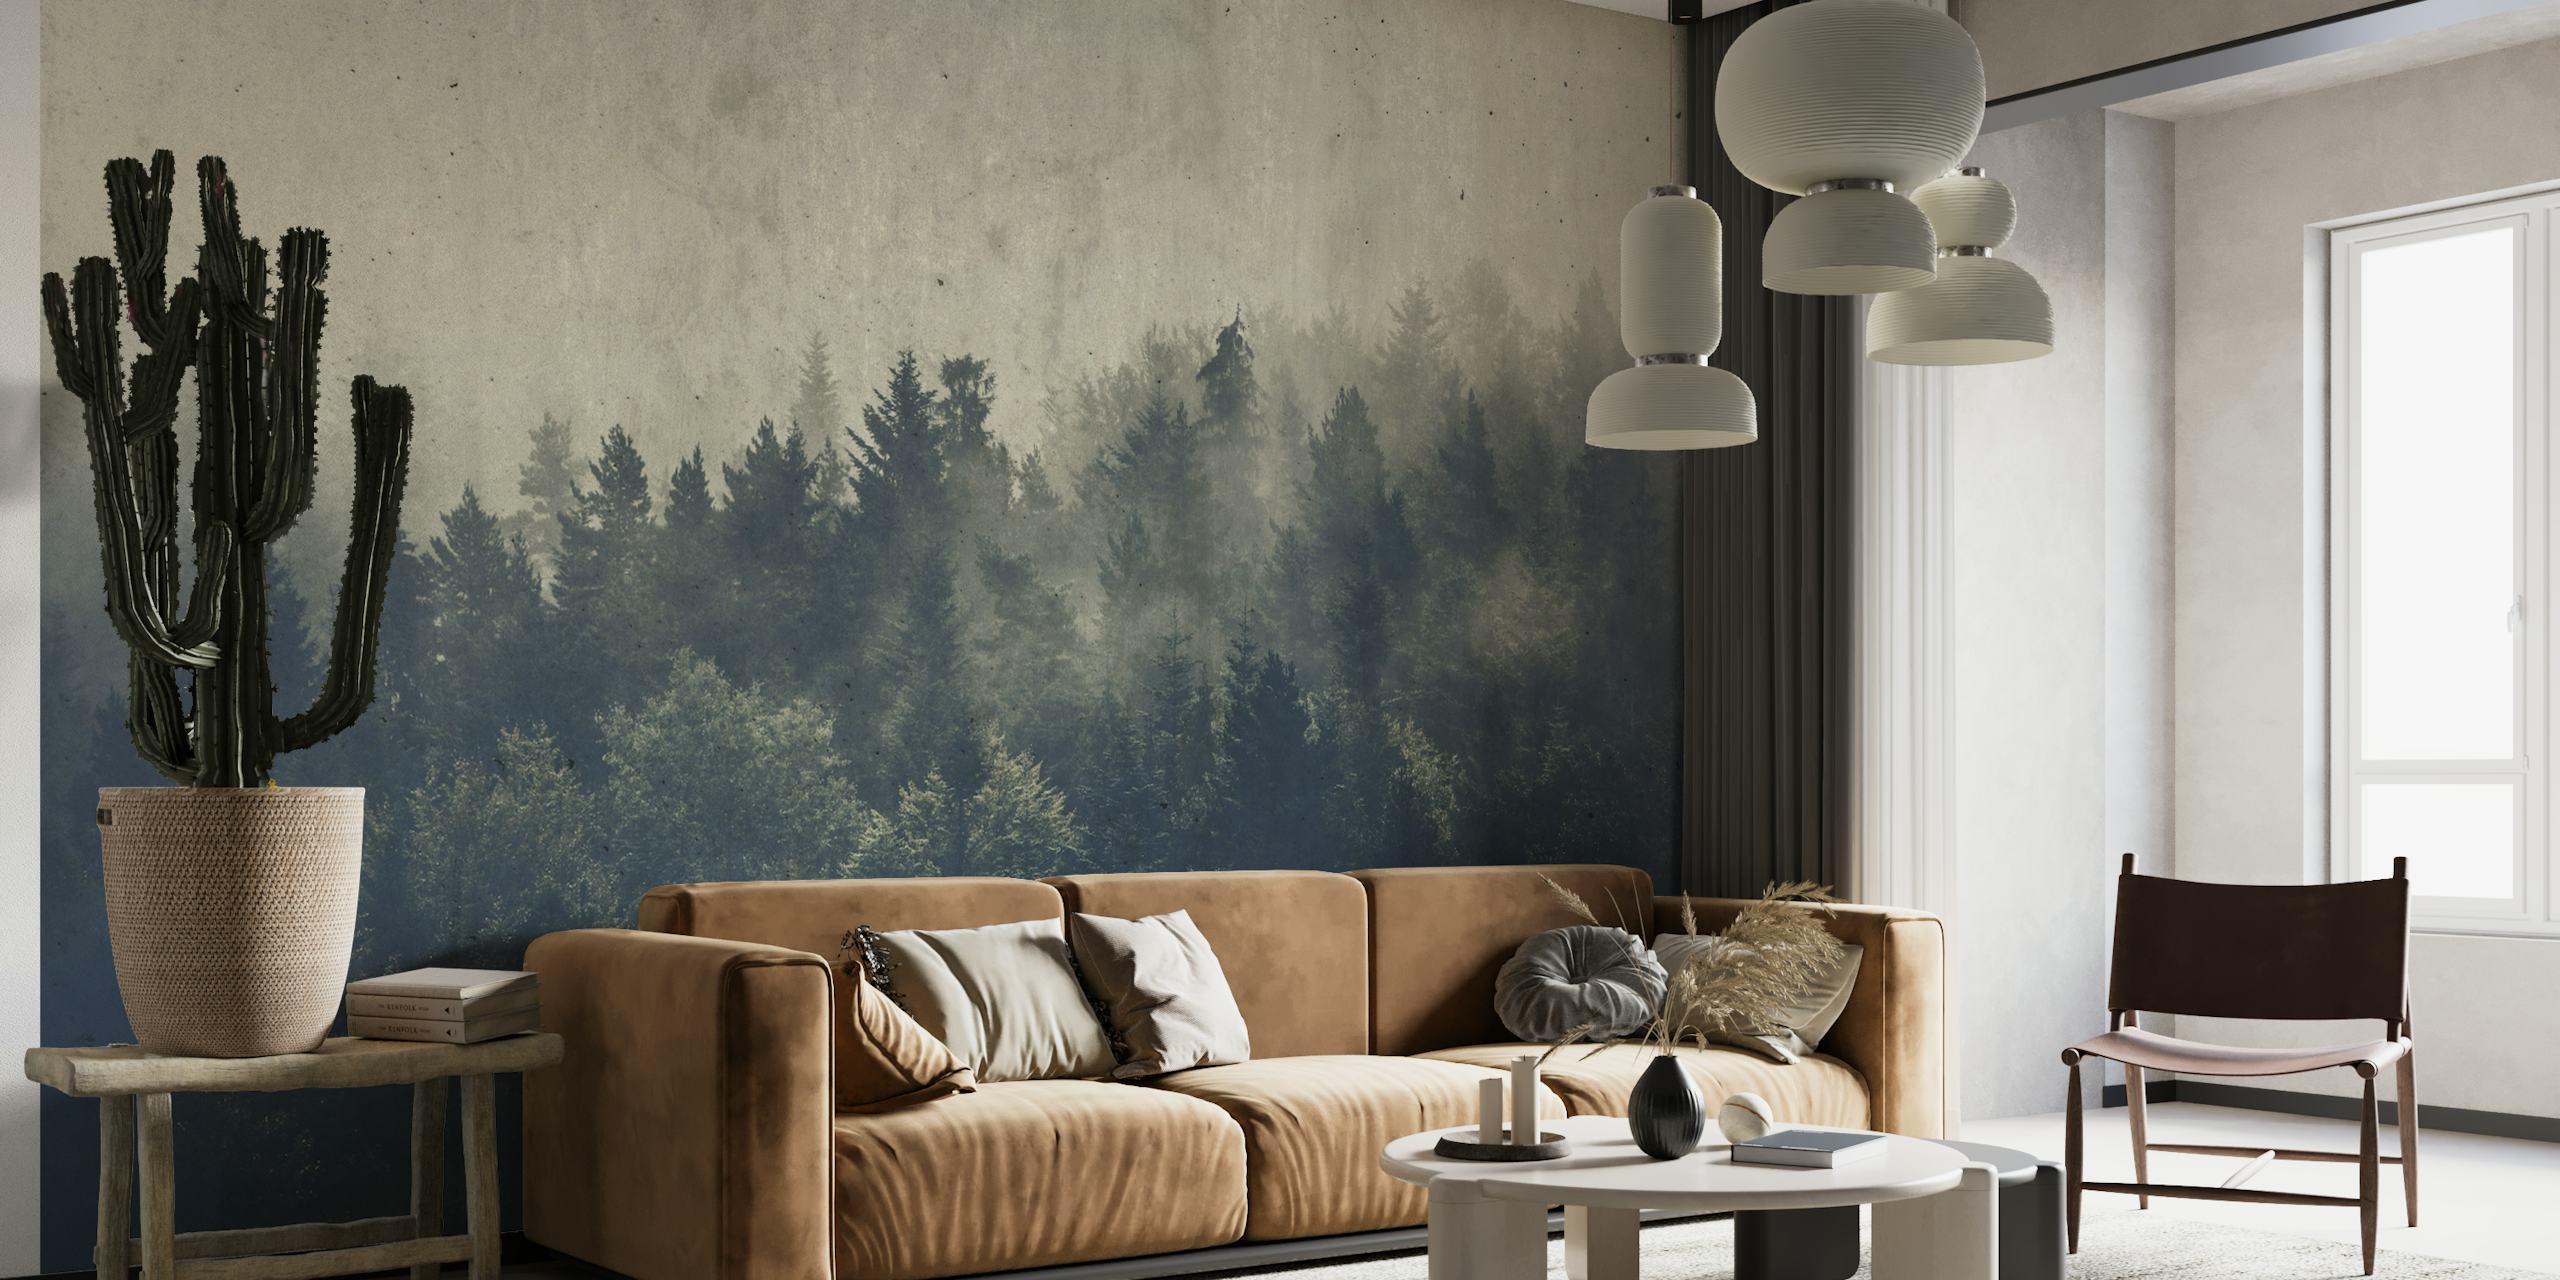 Misty forest wall mural with shades of dark green and grey, creating a serene and mysterious atmosphere.